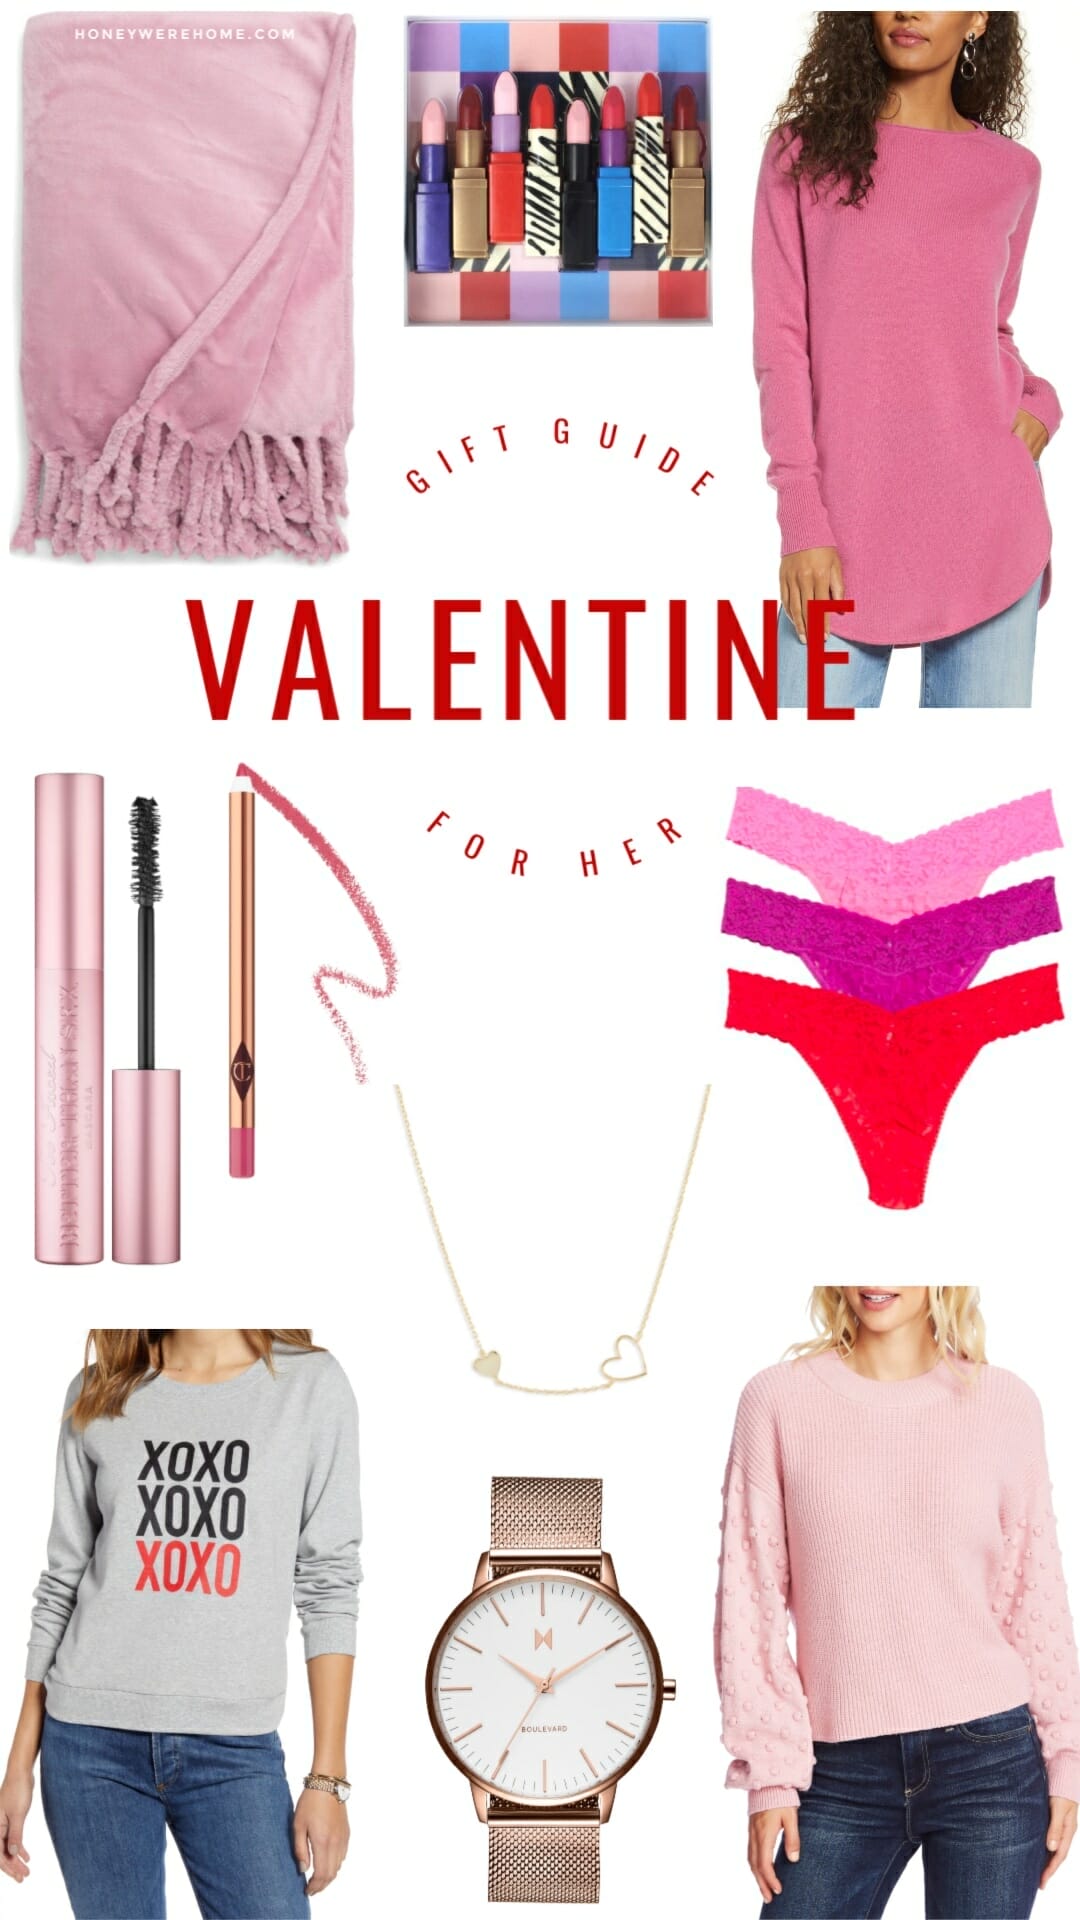 Valentine’s Gift Guide for Her